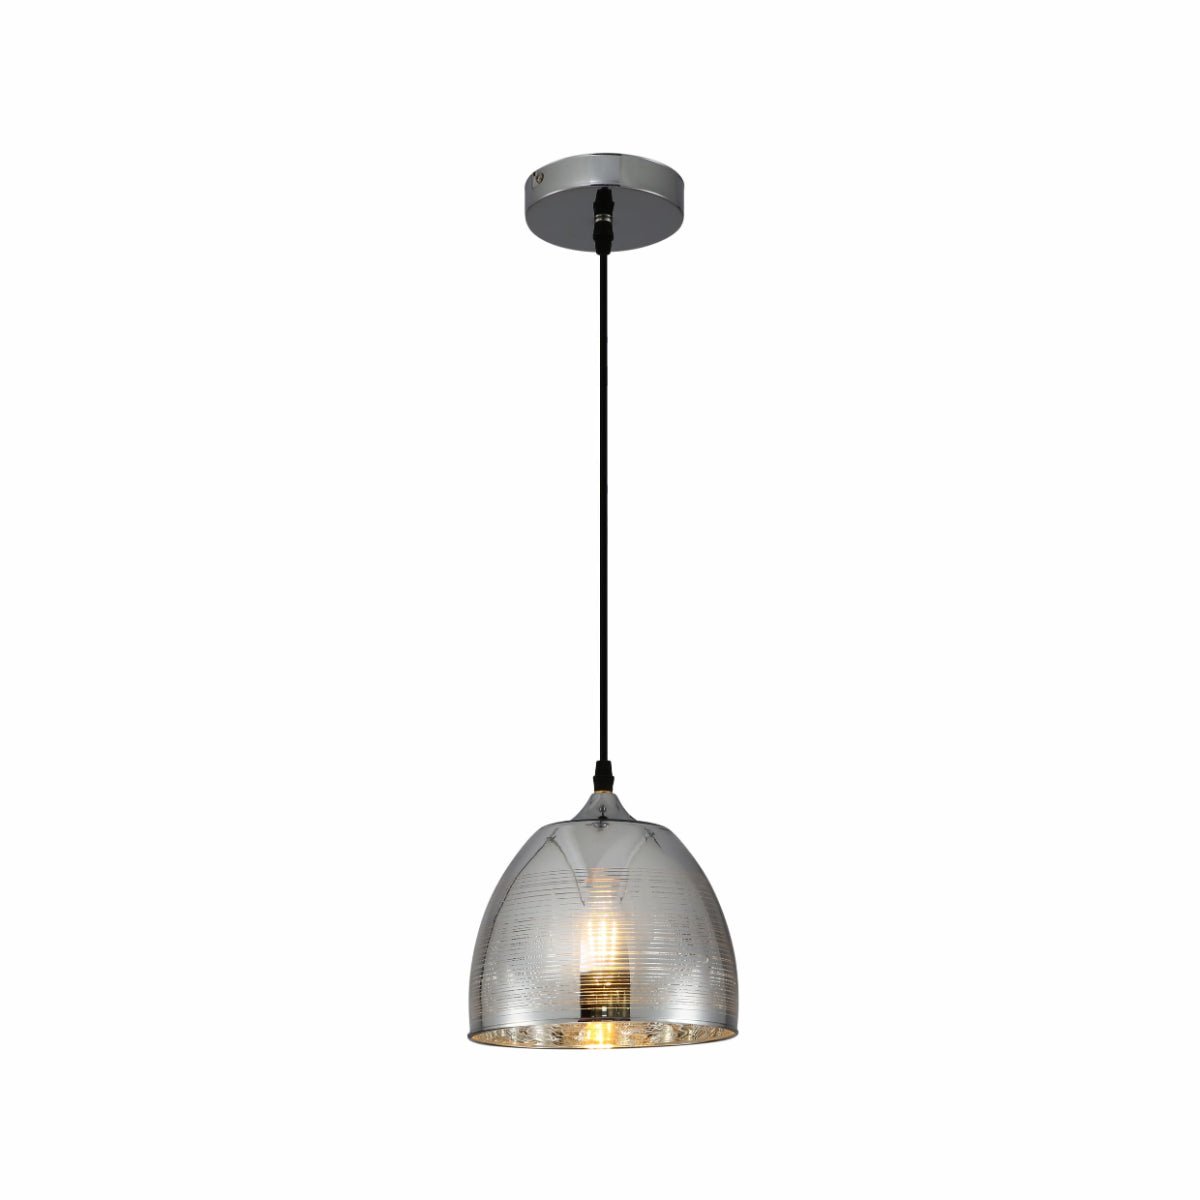 Main image of Silver Grey Glass Dome Pendant Ceiling Light with E27 Fitting | TEKLED 150-18012